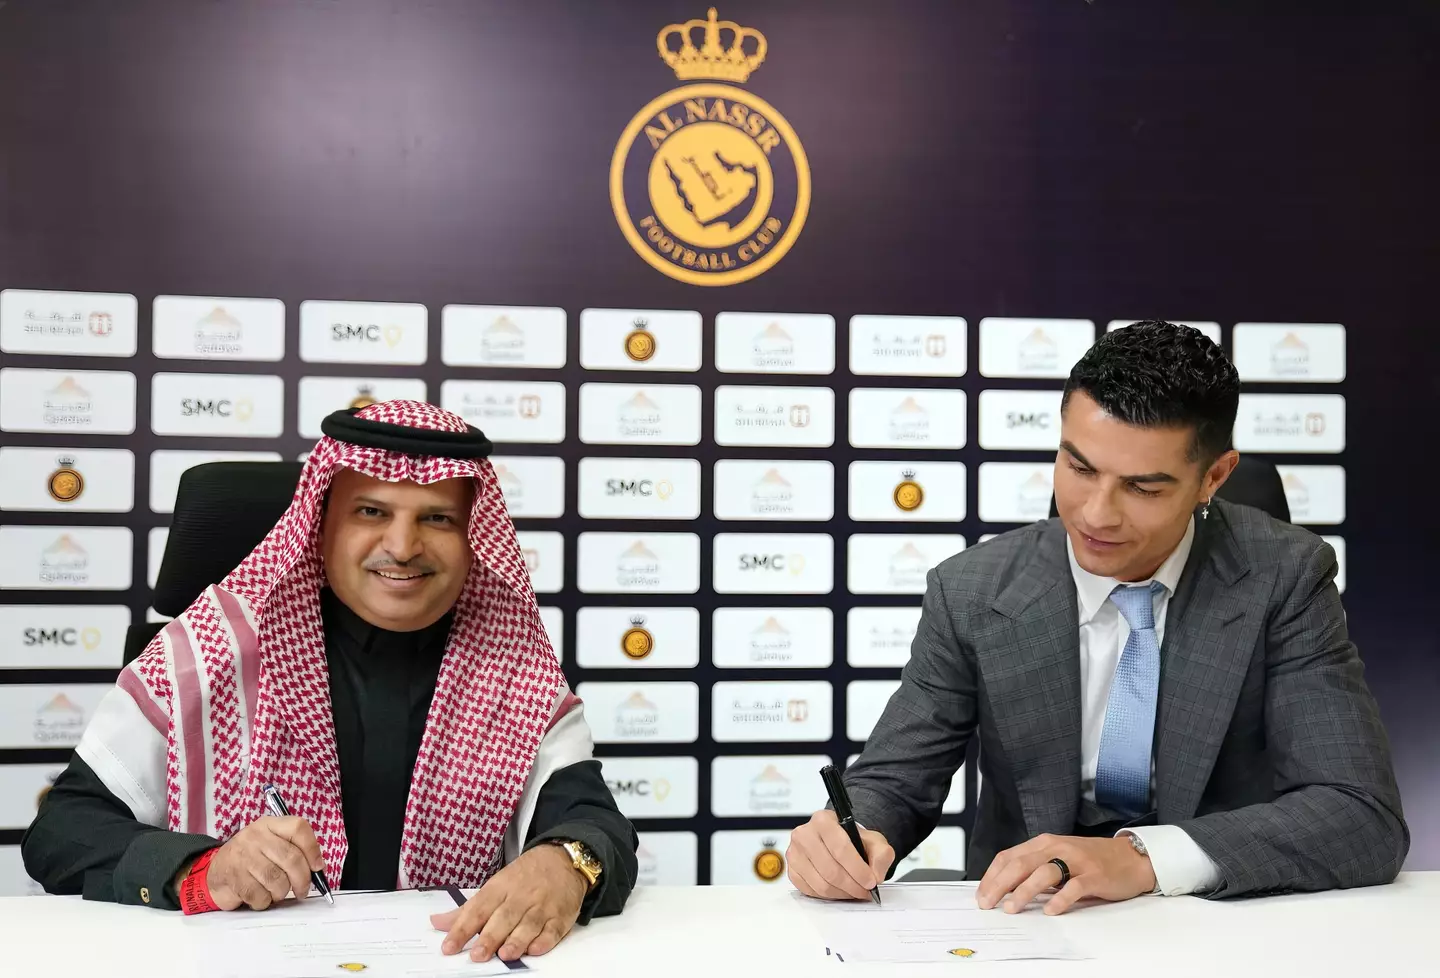 Ronaldo signing his contract with Al Nassr. (Image